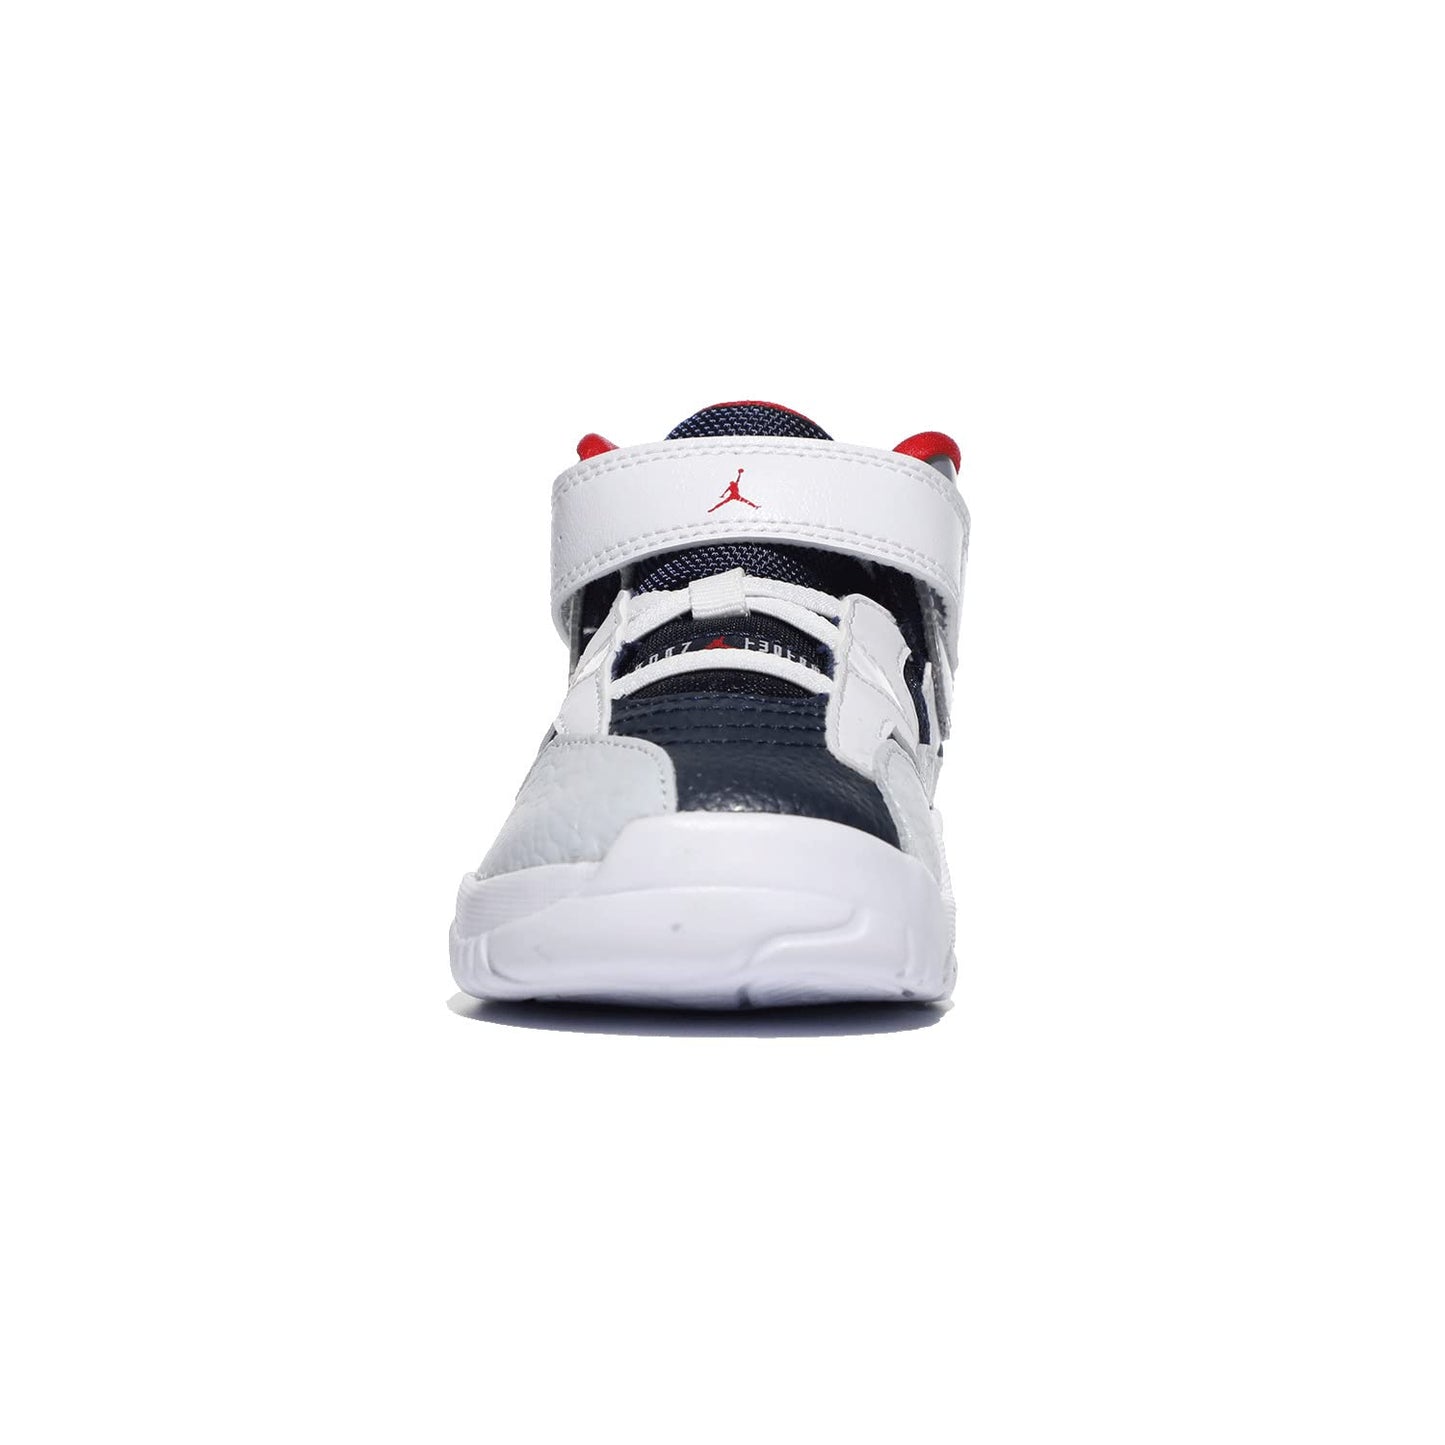 Image 6 of Jumpman Two Trey (Infant/Toddler)